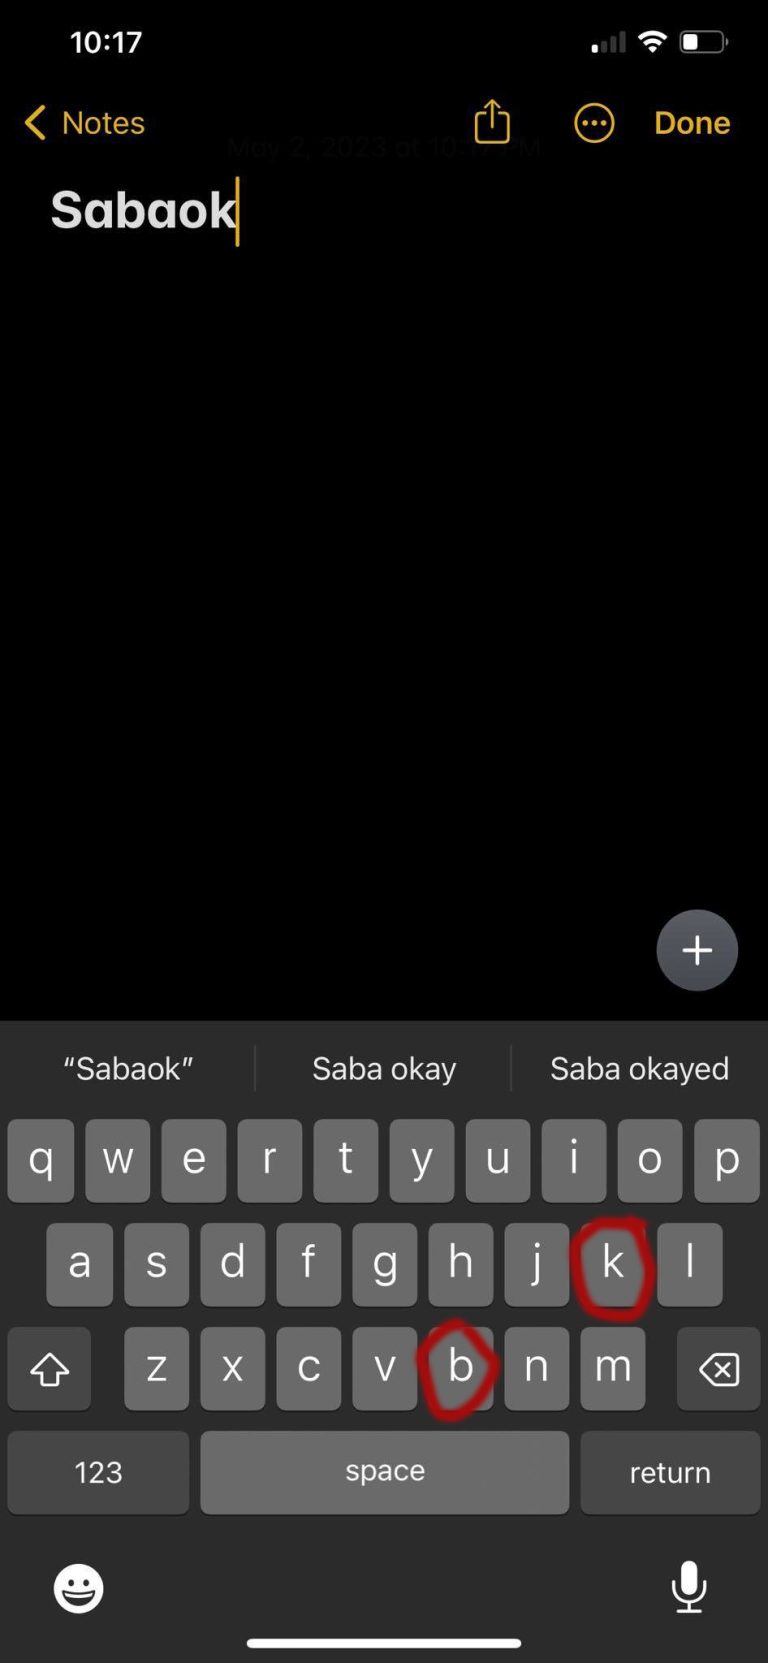 Sabaok Meaning in Tagalog